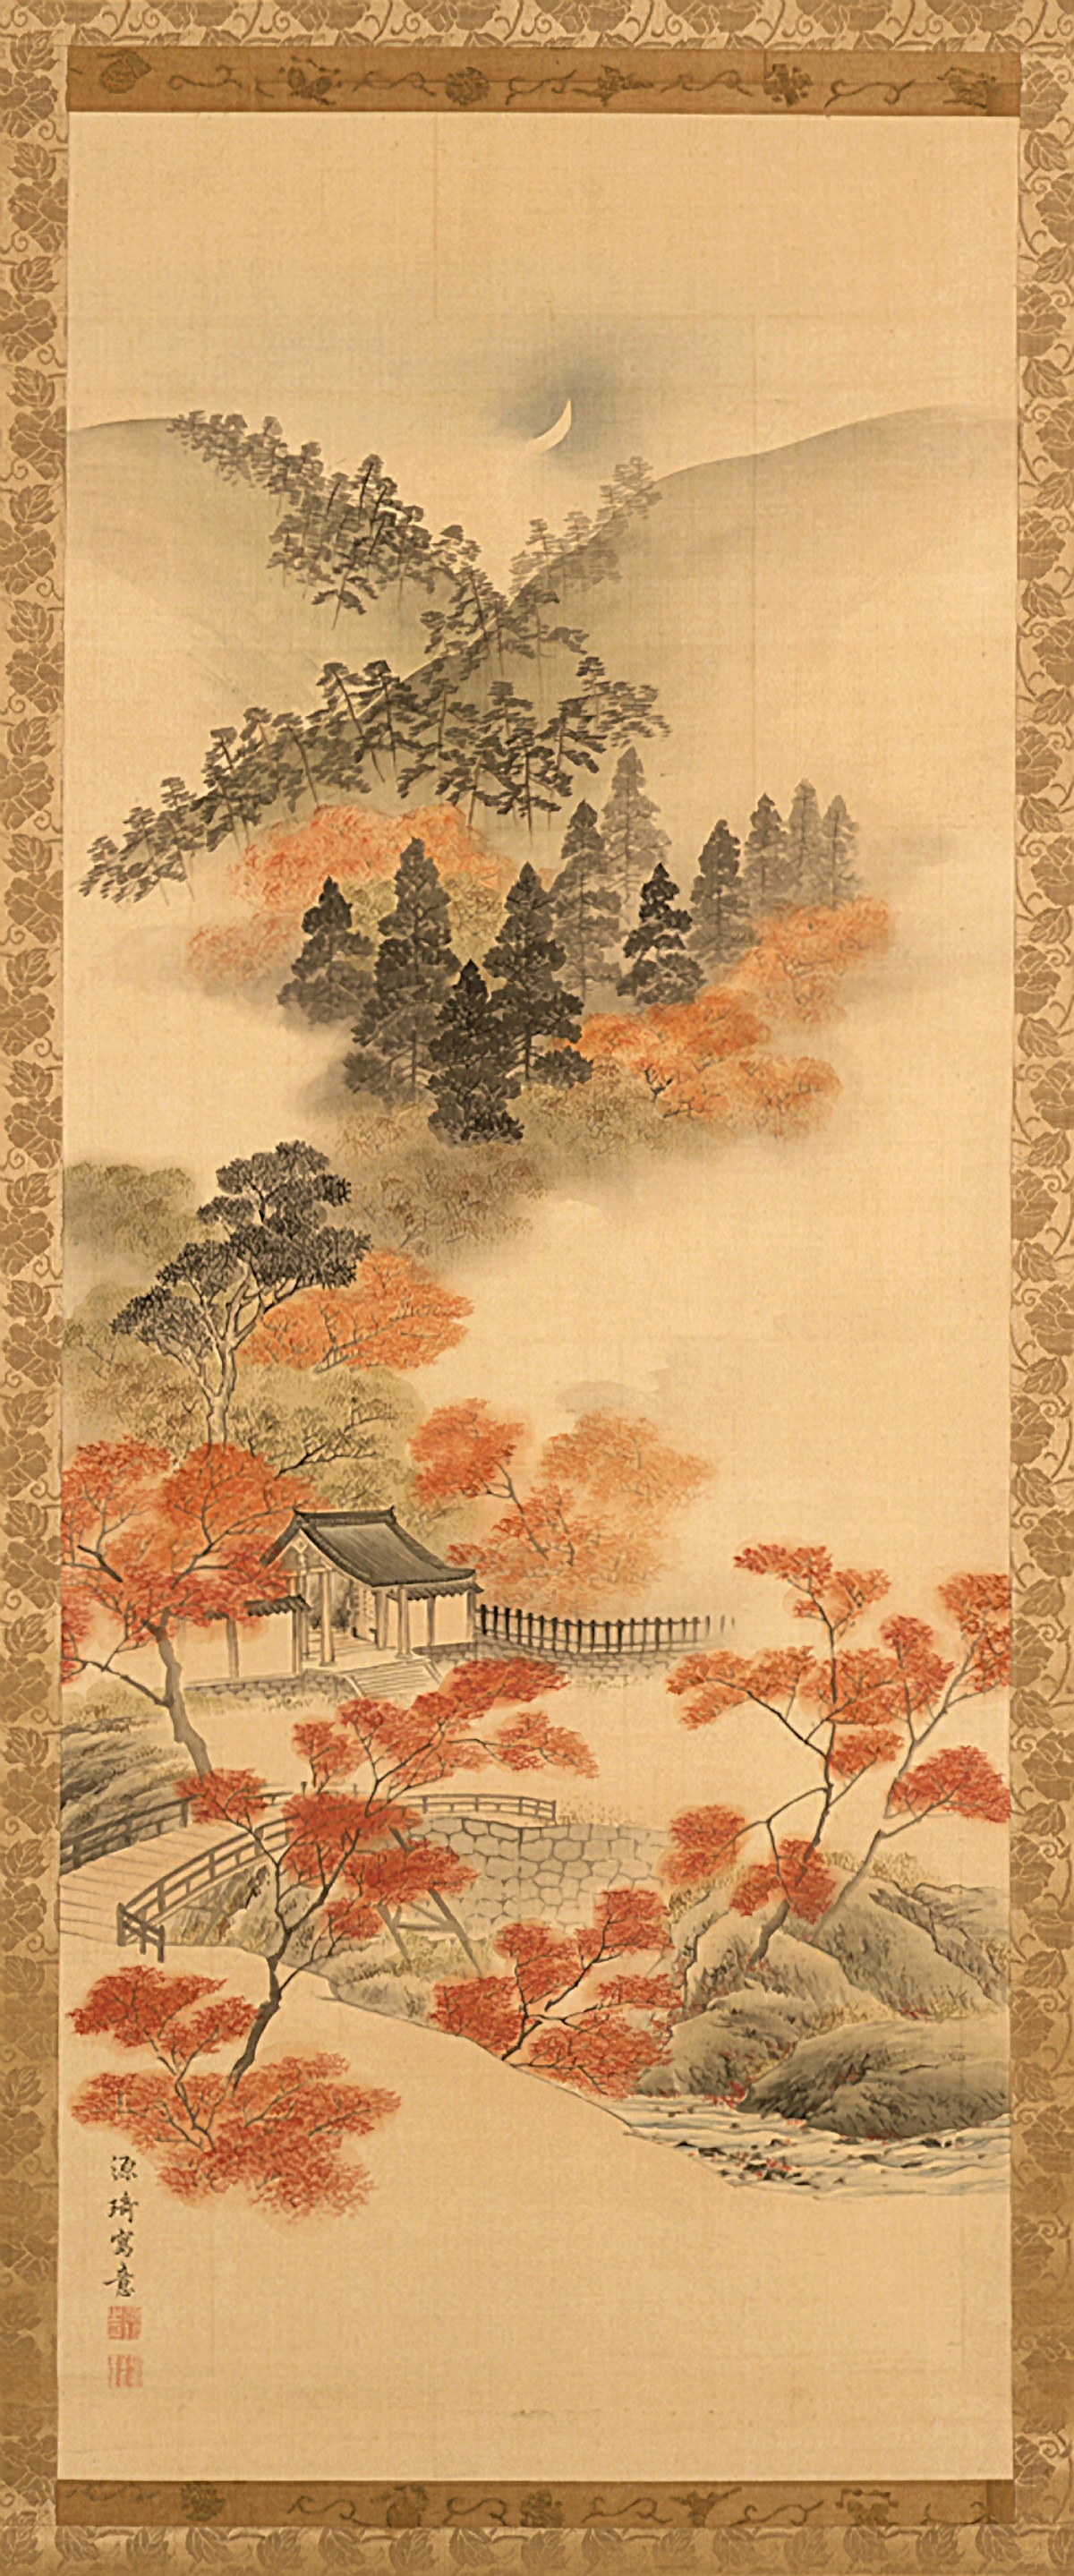 Japanese Painting A Walk In Nature Lacma